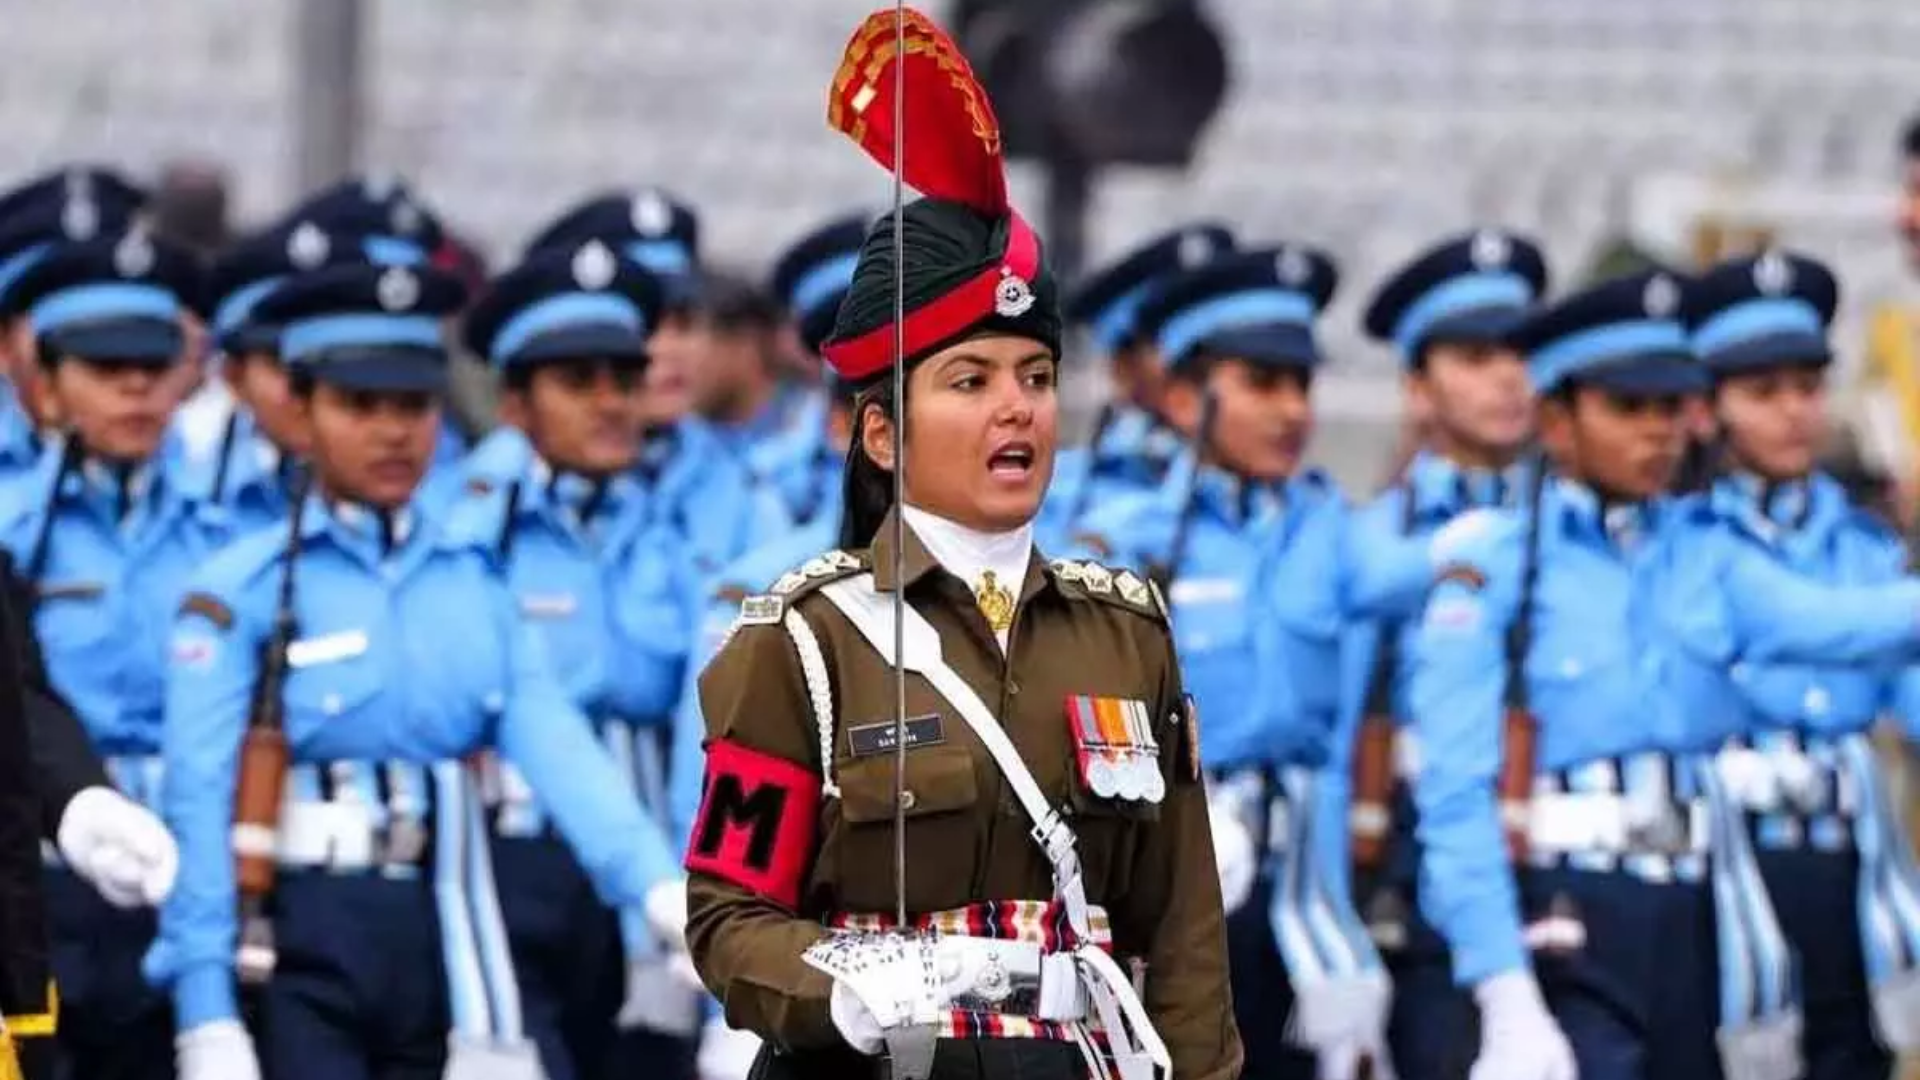 India Celebrates 75th Republic Day with Spectacular Parade Showcasing Diversity and Women Power